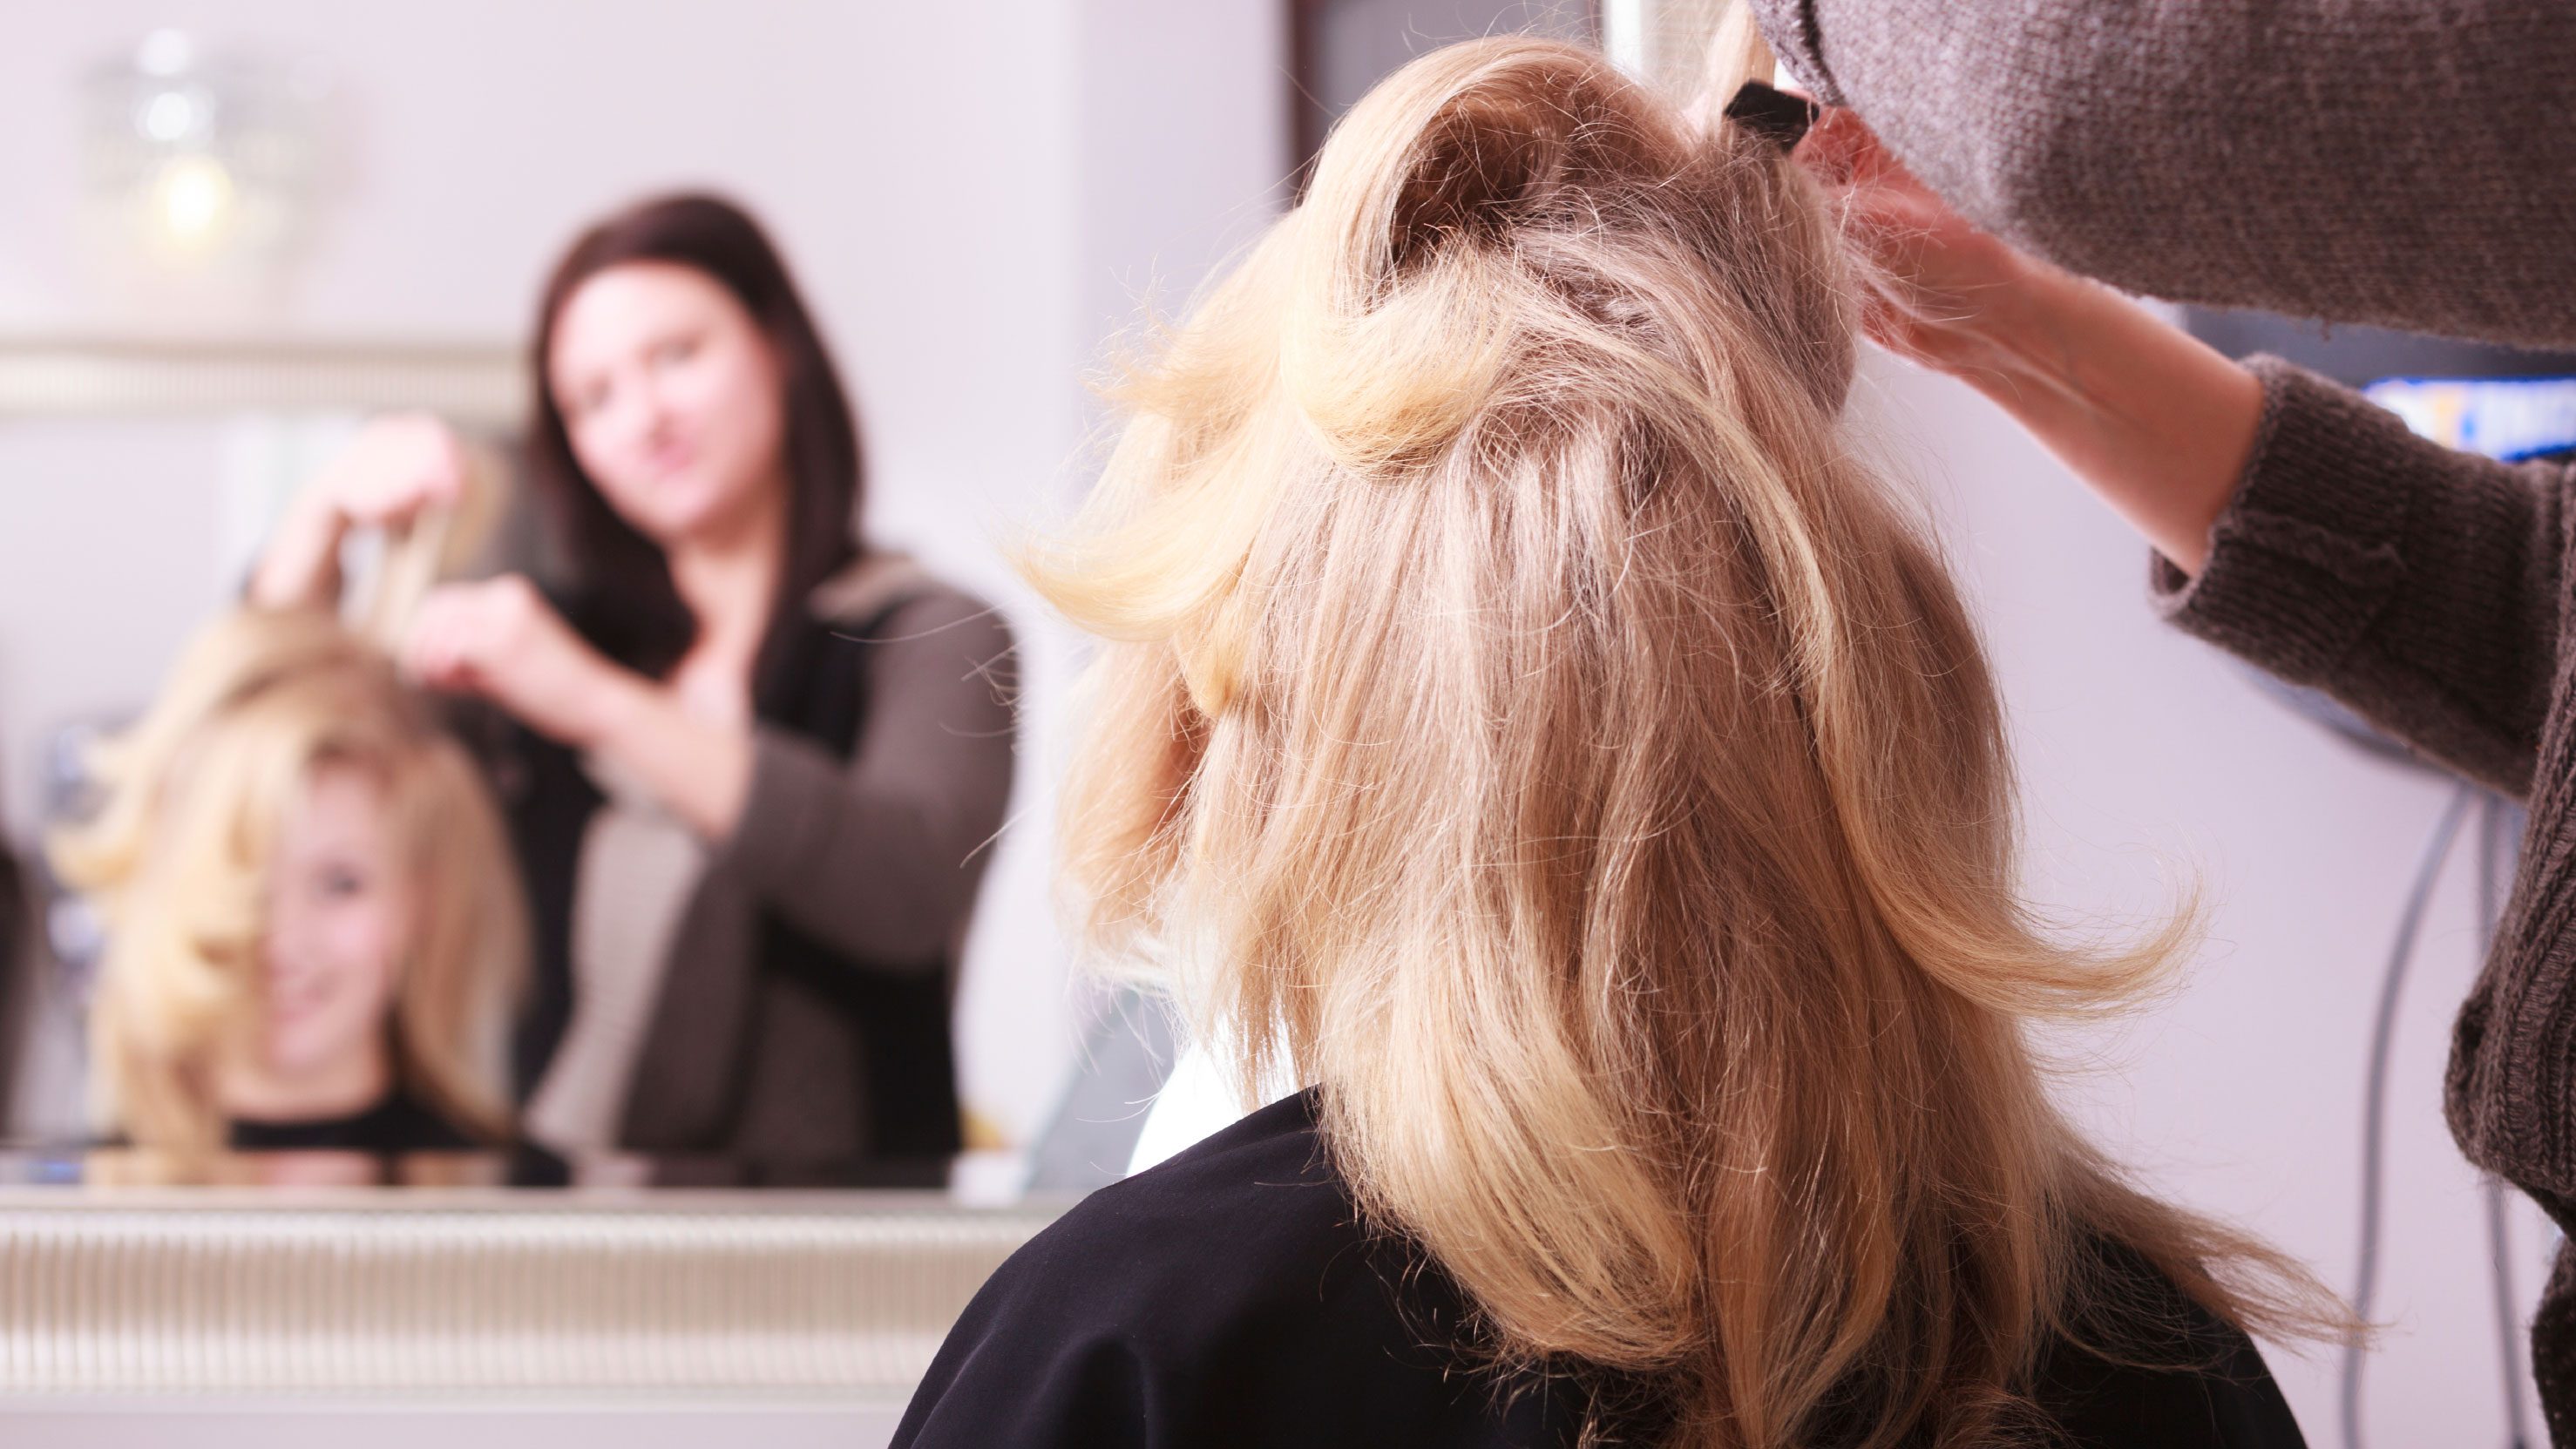 How do you find the closest hair salon?